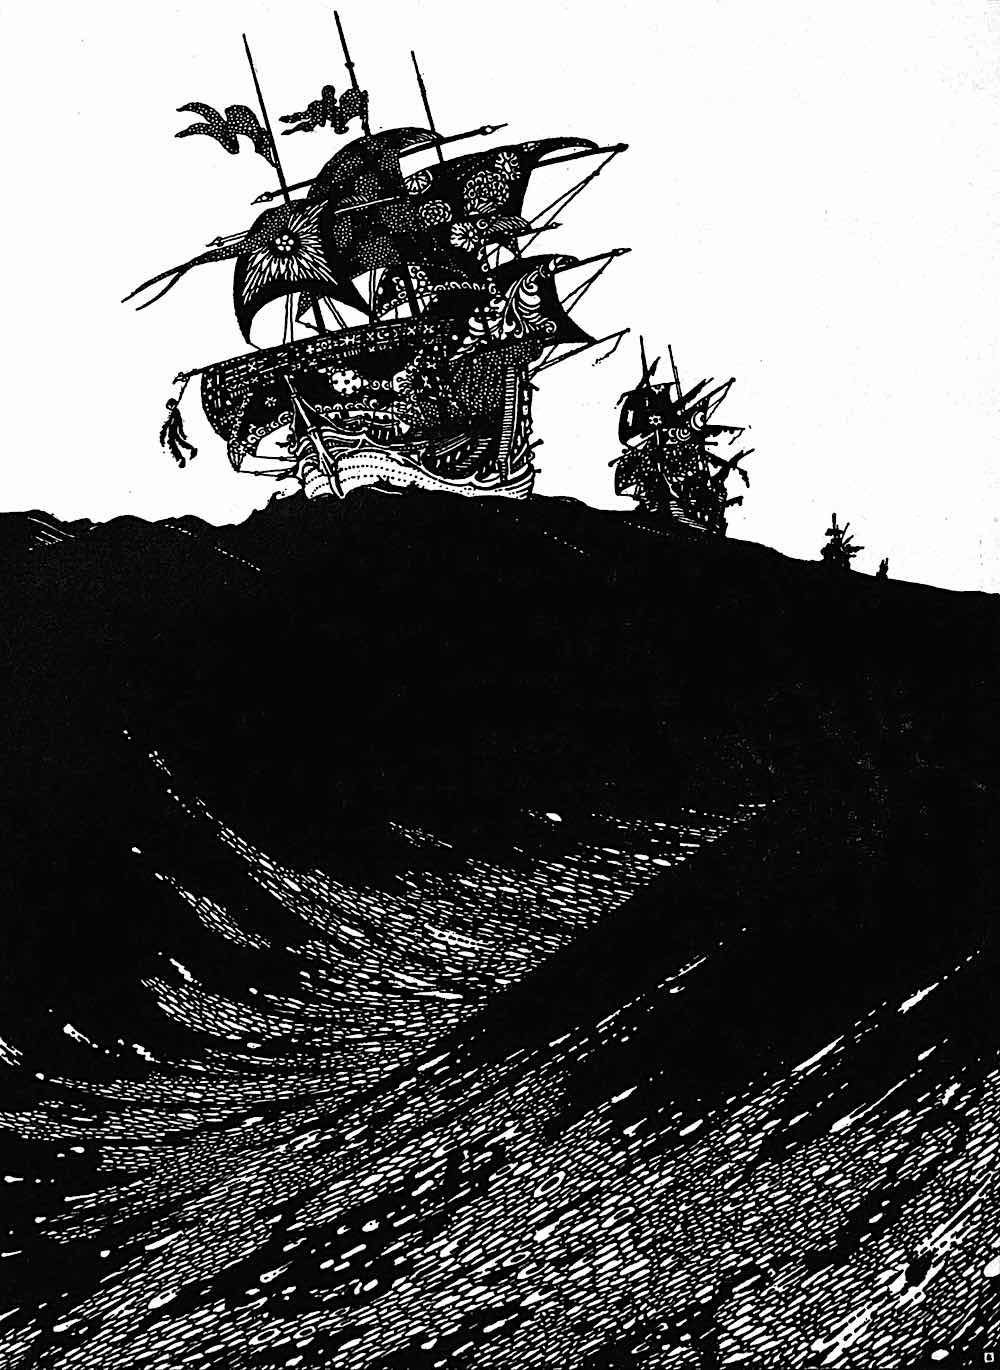 an old Harry Clarke book illustration, ships with black sails